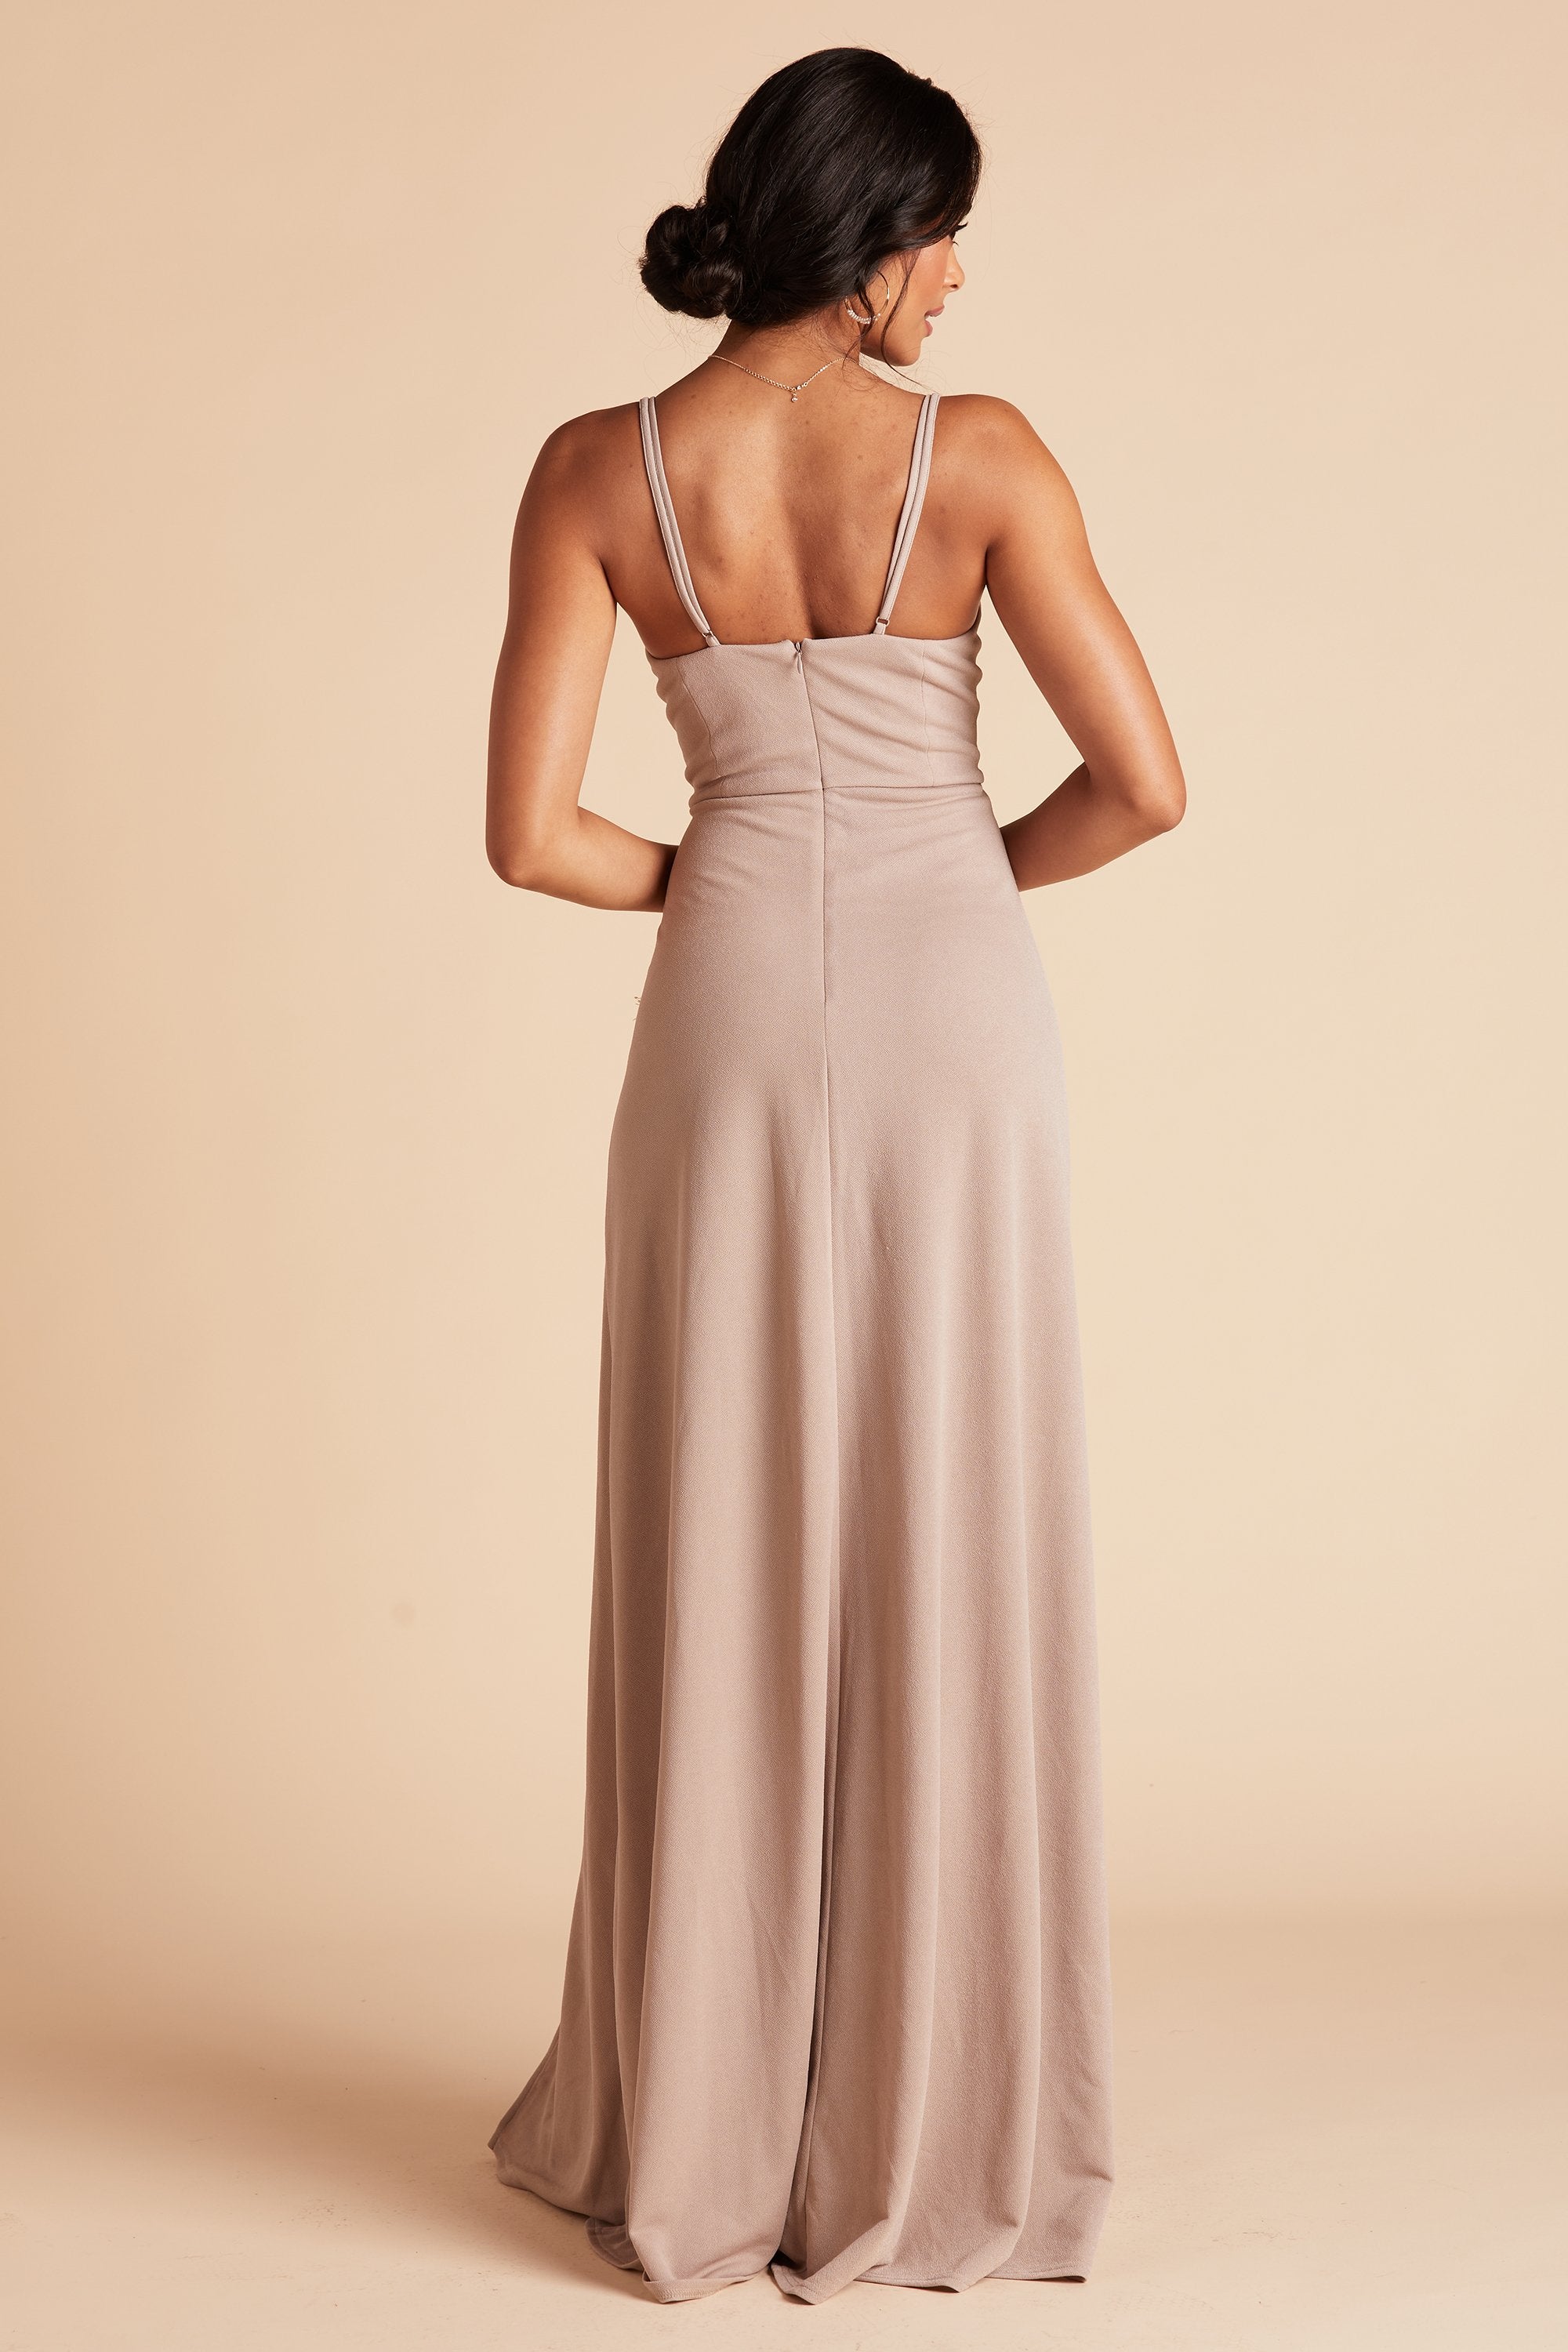 Back view of the Ash Bridesmaid Dress in taupe crepe shows skinny adjustable straps as well as an open back just below shoulder blades.